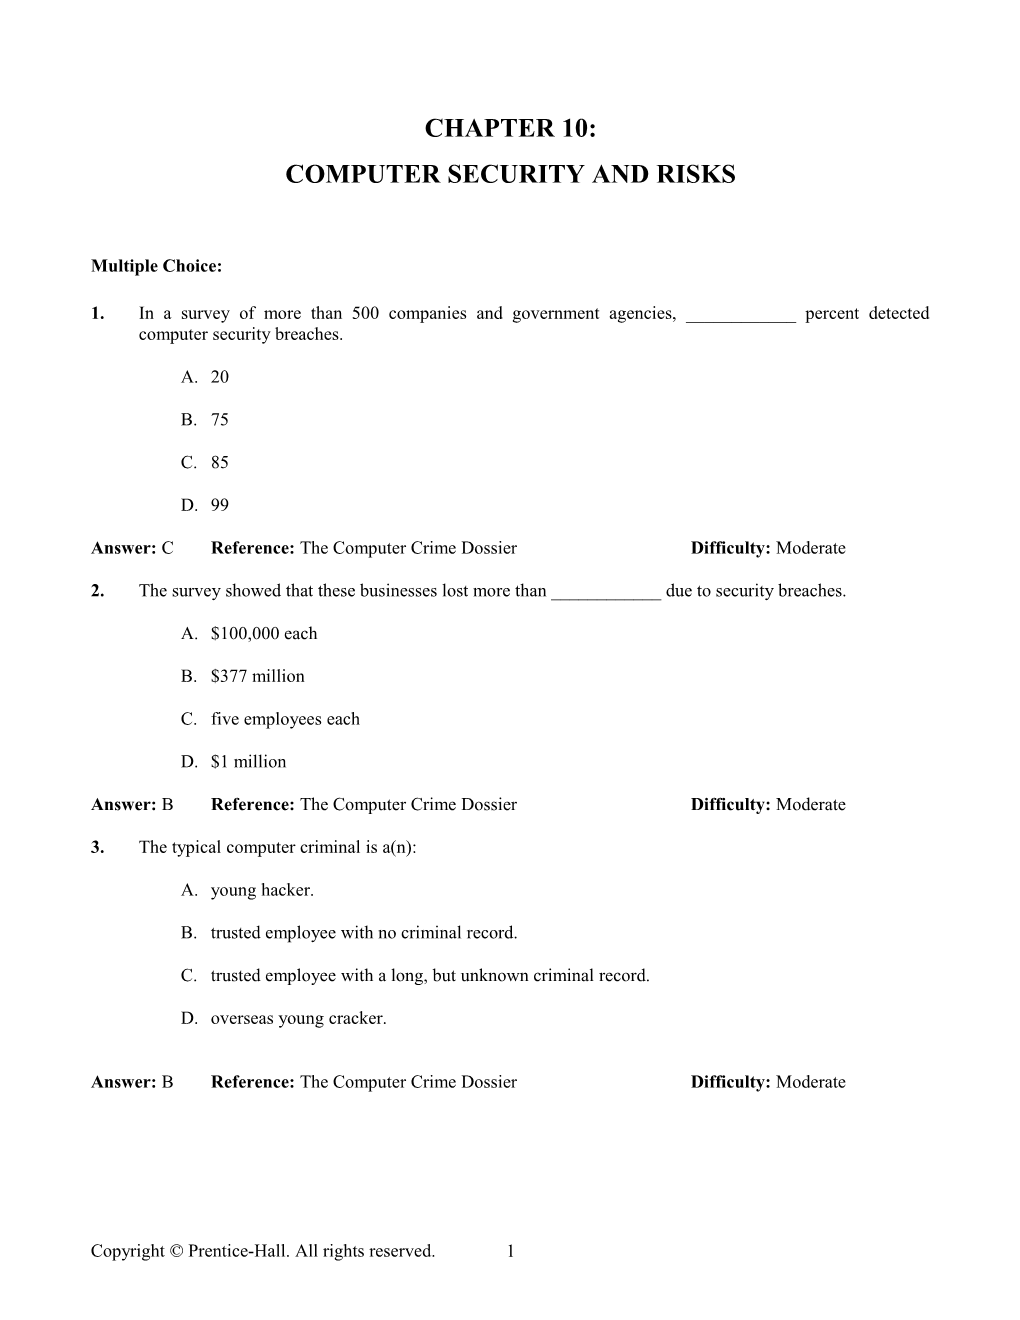 Chapter 10: Computer Security and Risks